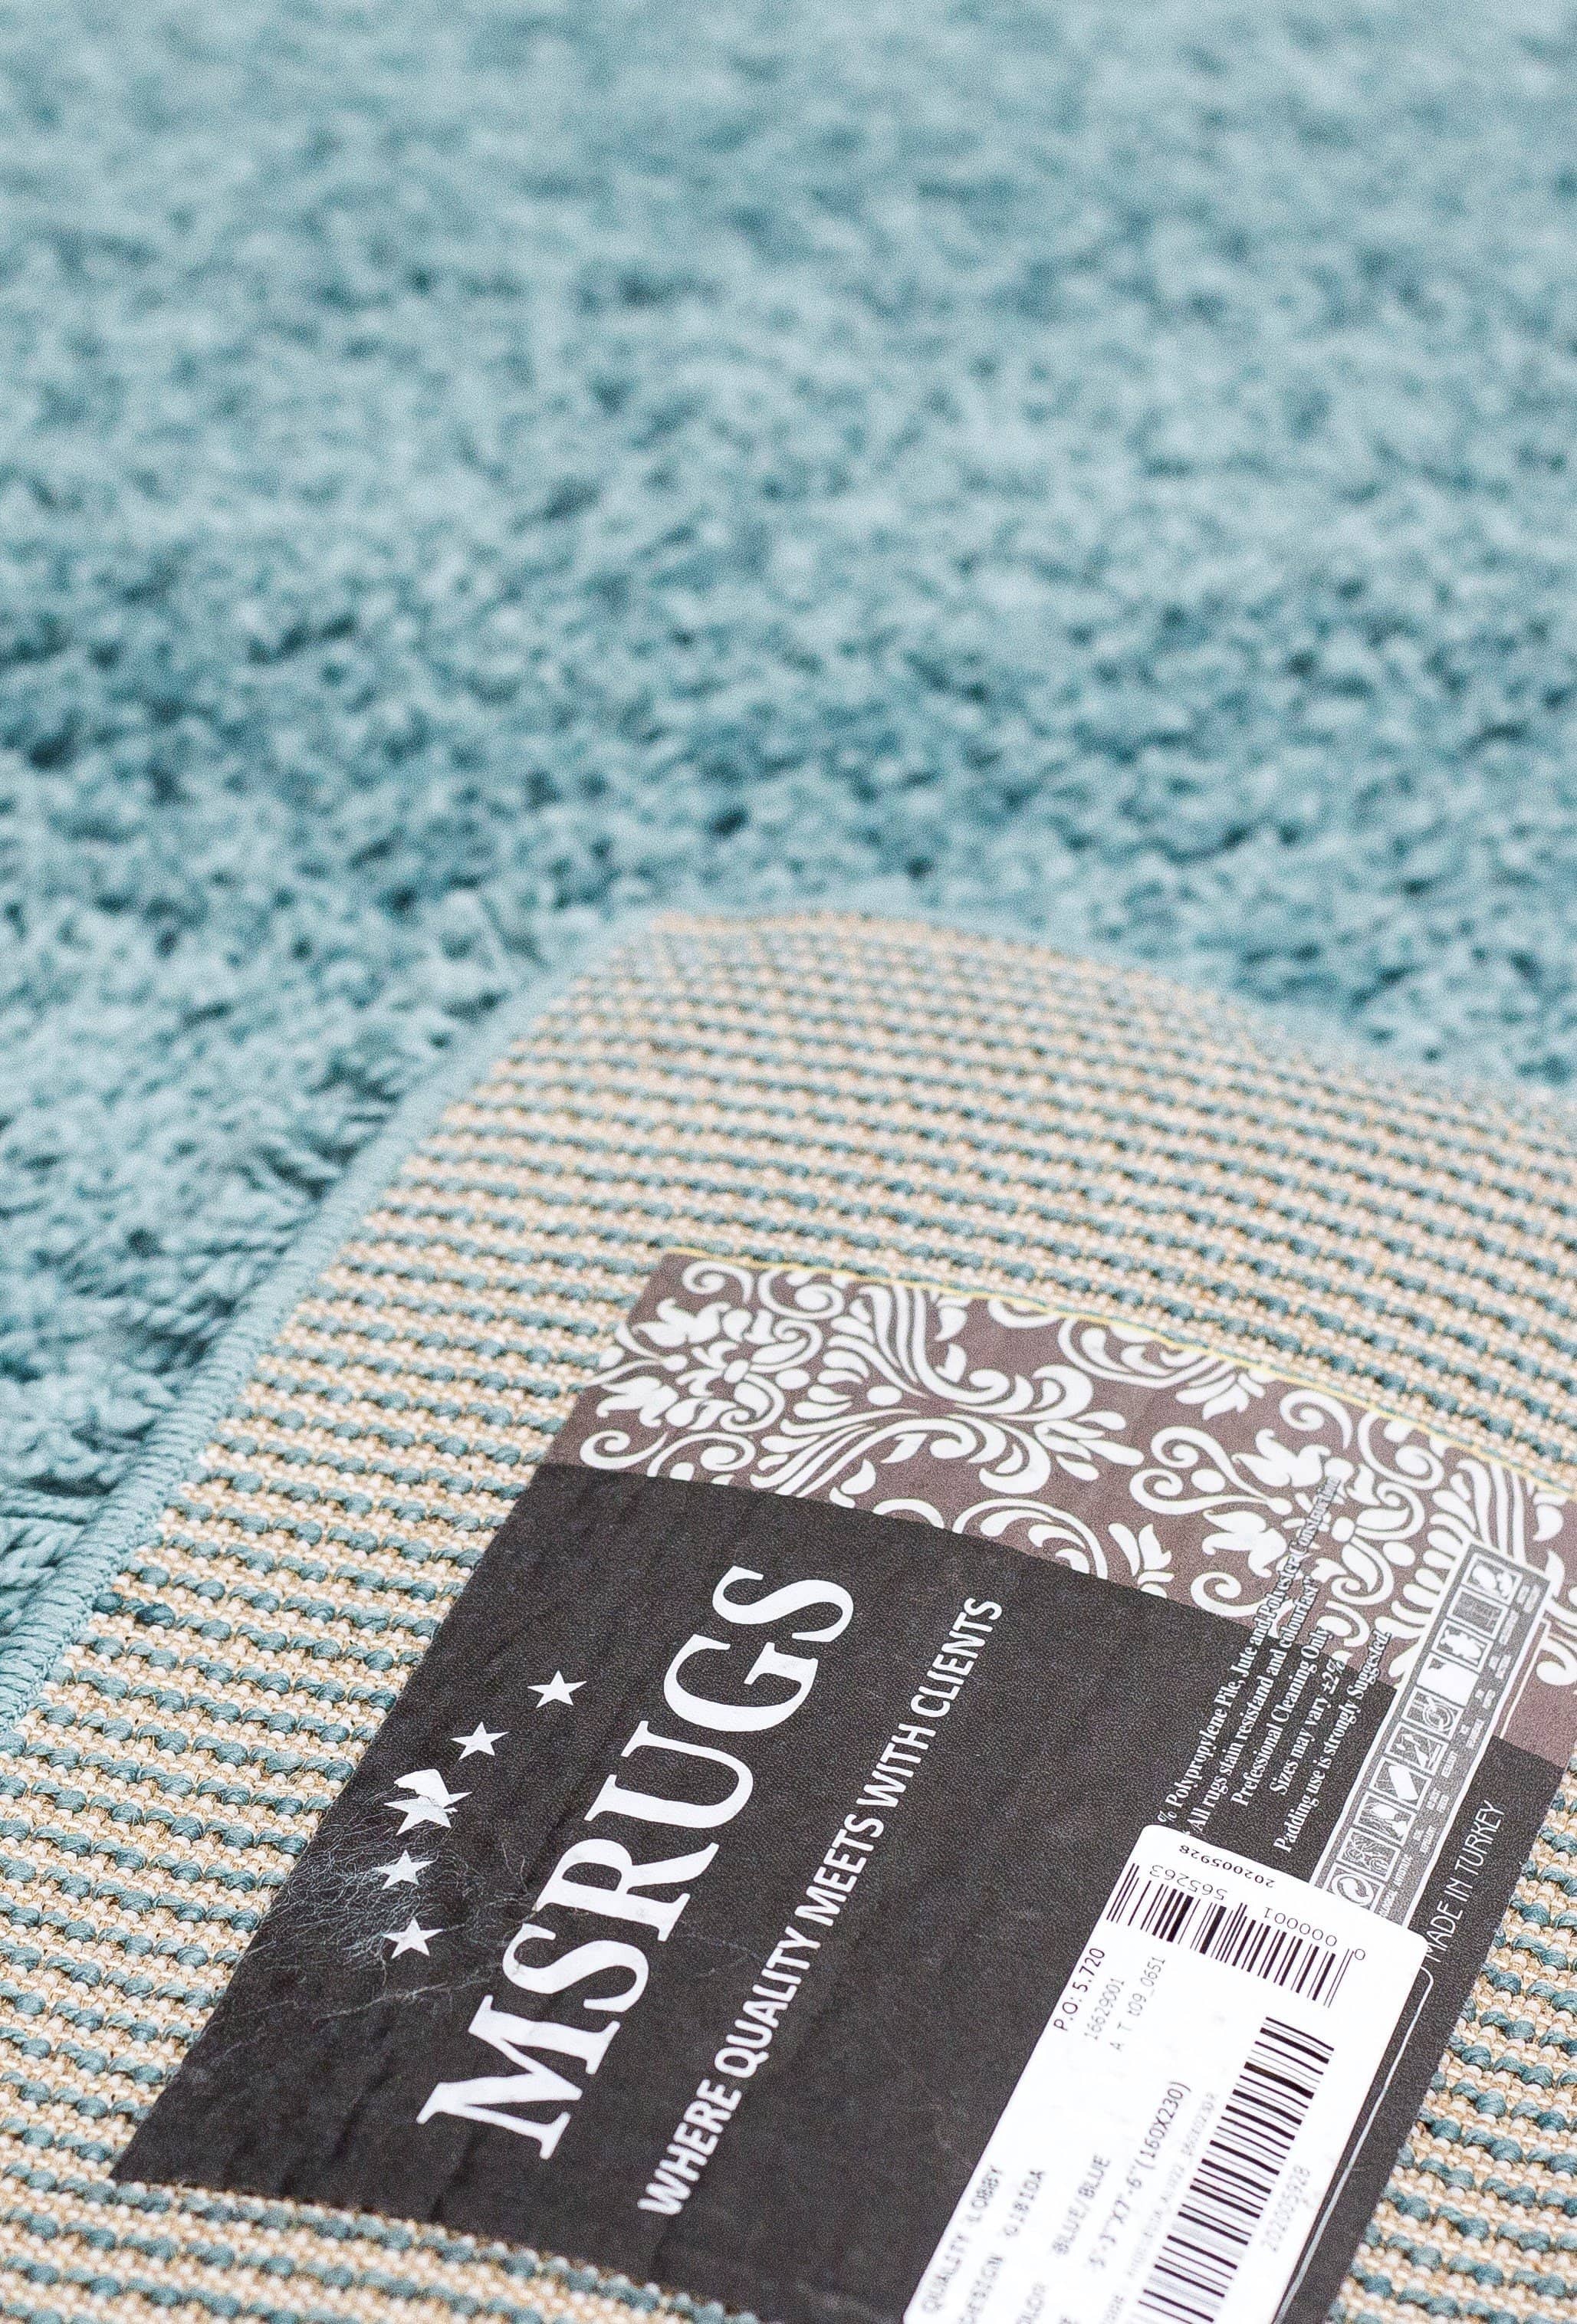 Super Shaggy Area Rug Light Blue 1810 - Context USA - Area Rug by MSRUGS